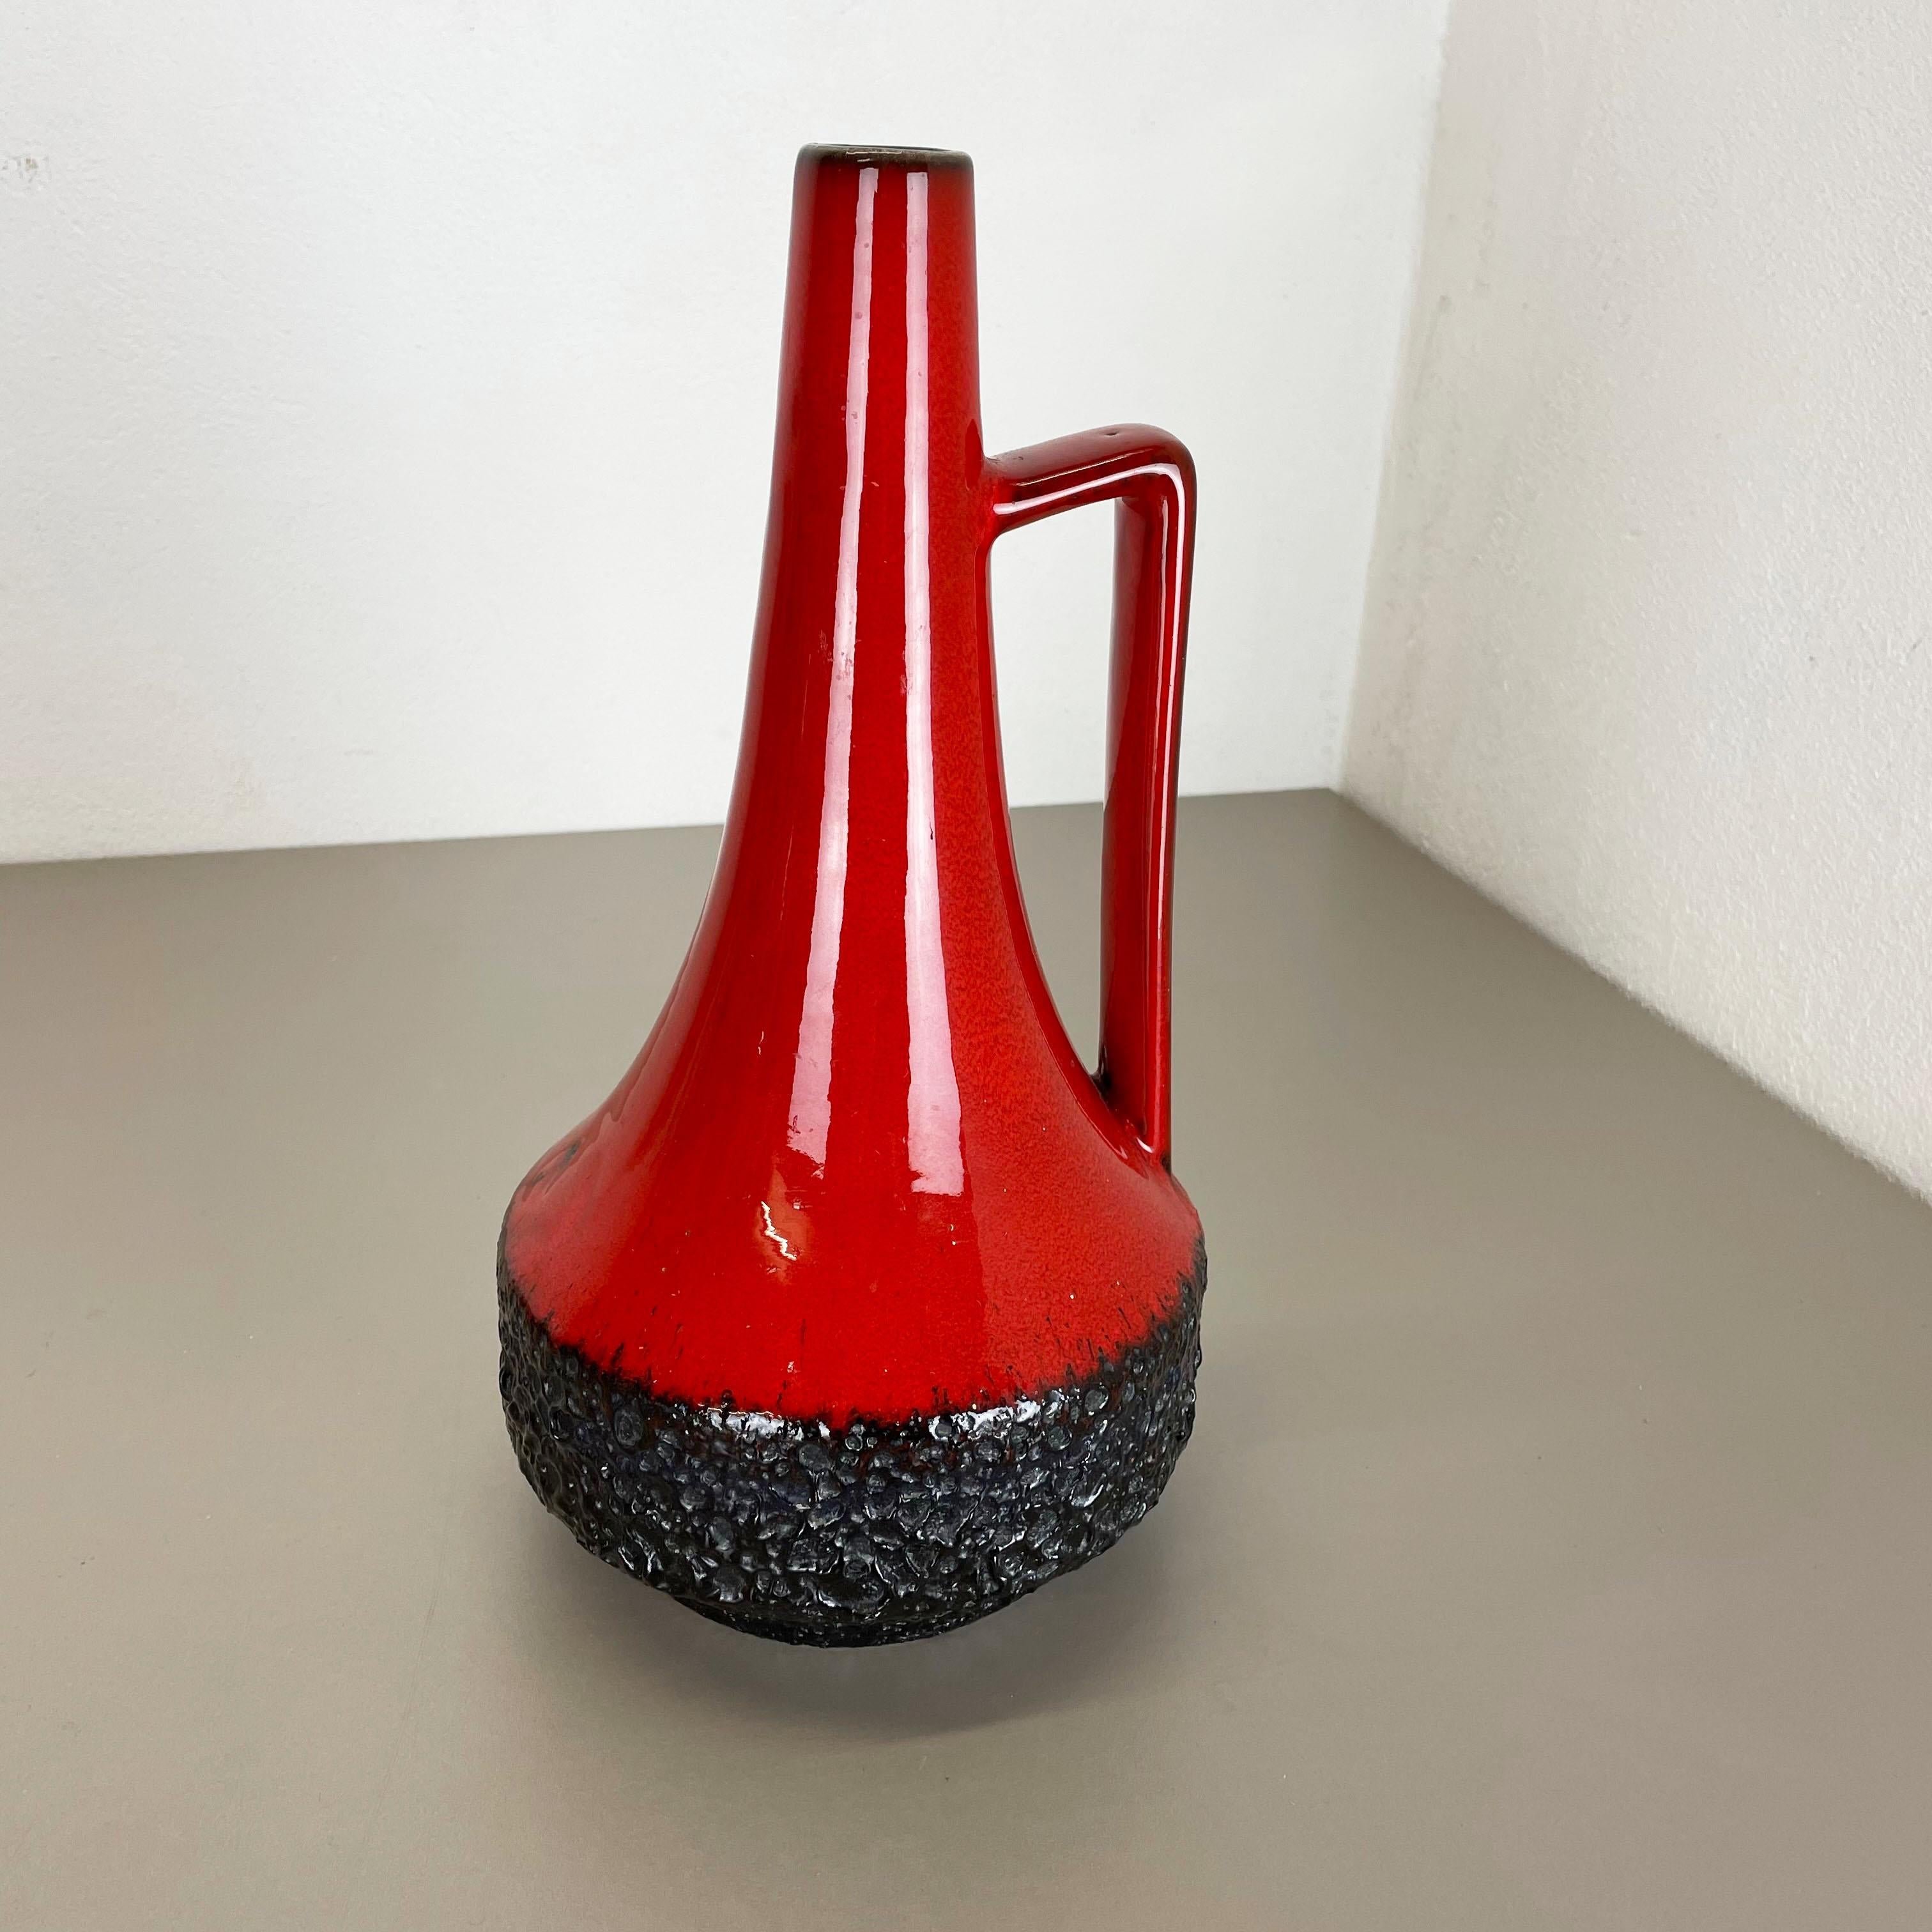 Article:

Pottery ceramic vase


Producer:

JOPEKO Ceramic, Germany



Decade:

1970s




Original vintage 1970s pottery ceramic vase made in Germany. High quality German production with a nice abstract brutalist structure and